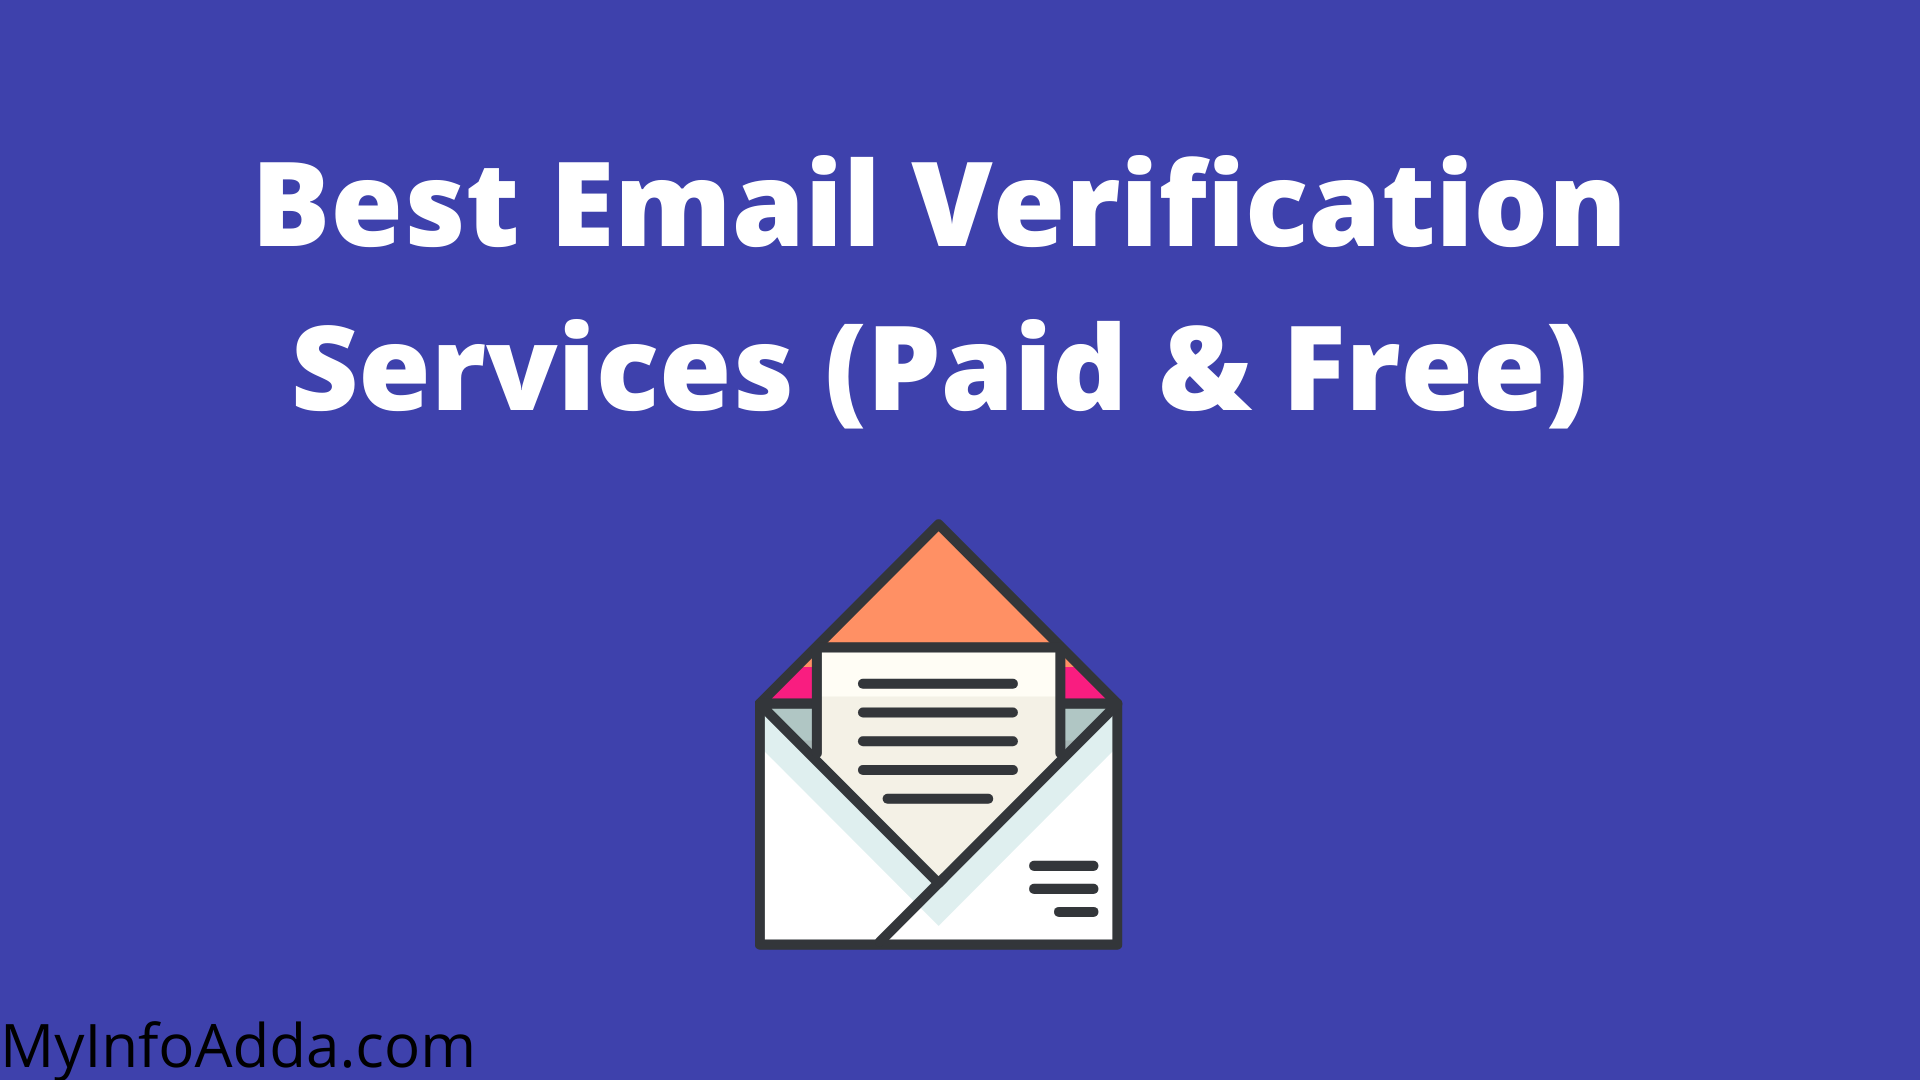 Best Email Verification Services (Paid & Free)